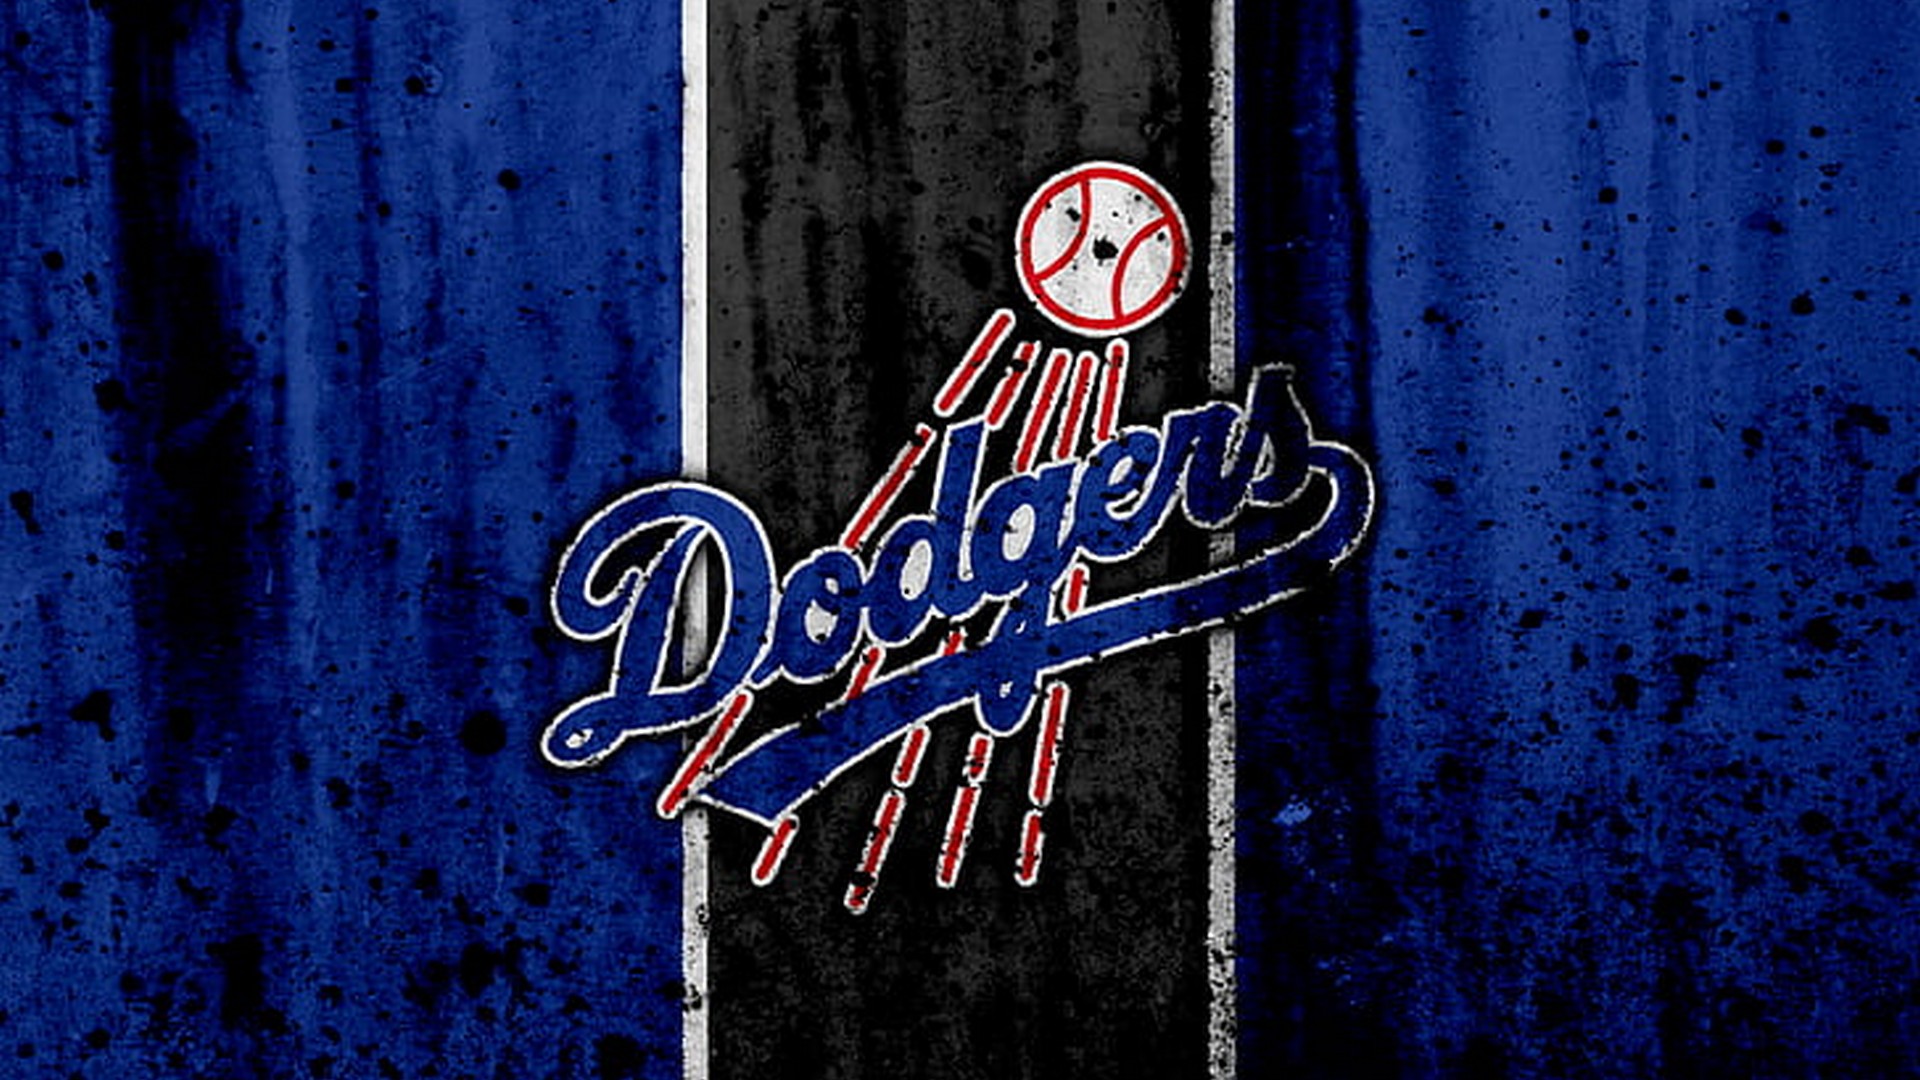 Los Angeles Dodgers HD Wallpapers with high-resolution 1920x1080 pixel. You can use this wallpaper for Mac Desktop Wallpaper, Laptop Screensavers, Android Wallpapers, Tablet or iPhone Home Screen and another mobile phone device